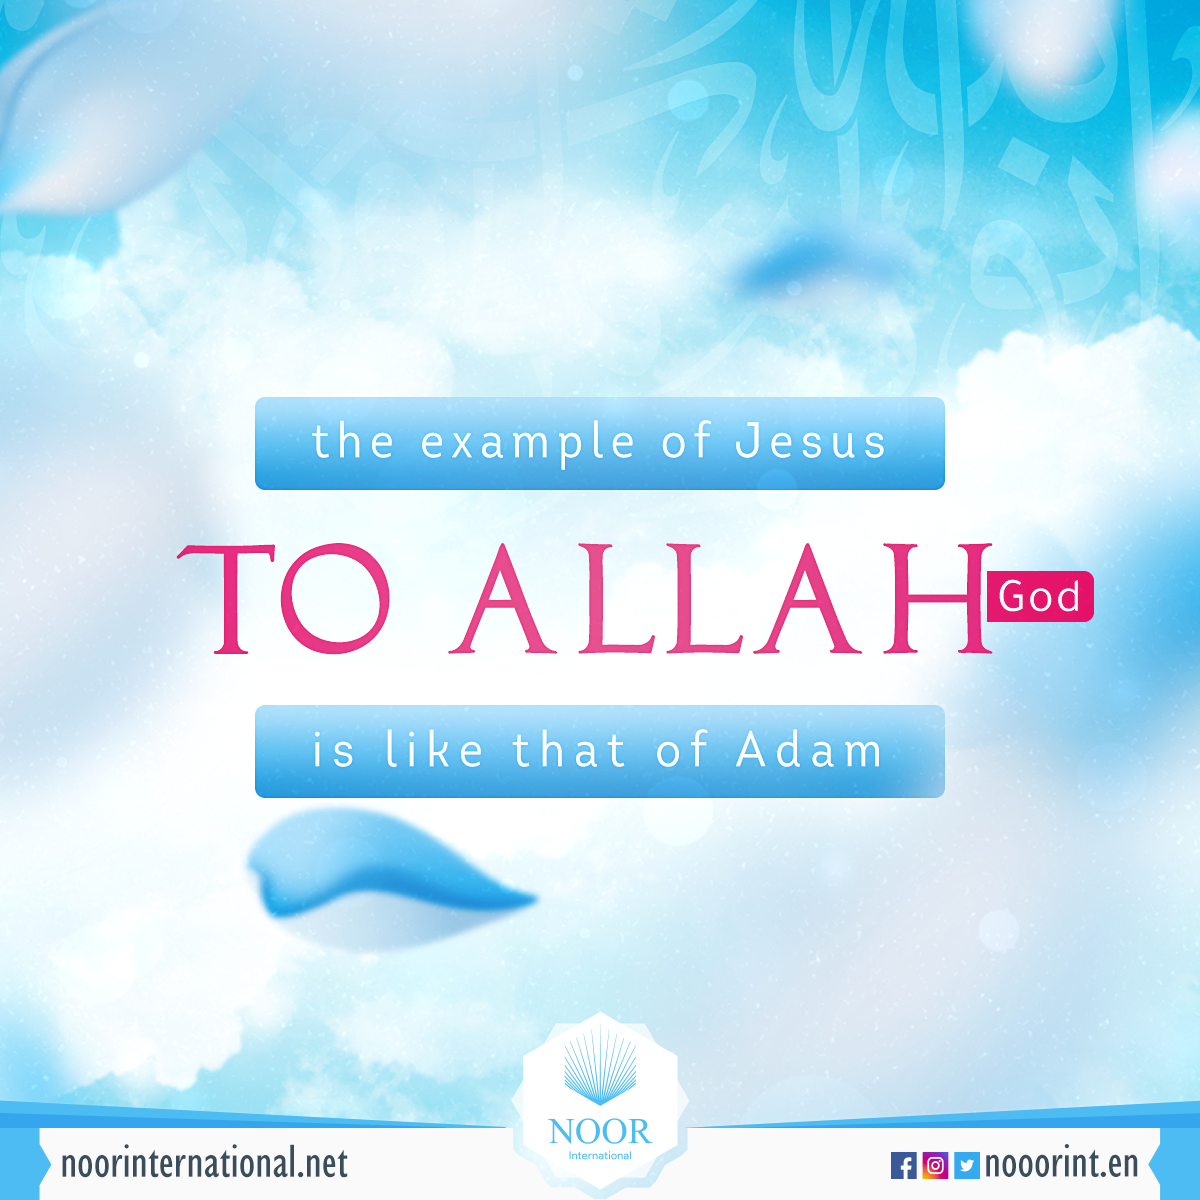 the example of Jesus to Allah is like that of Adam